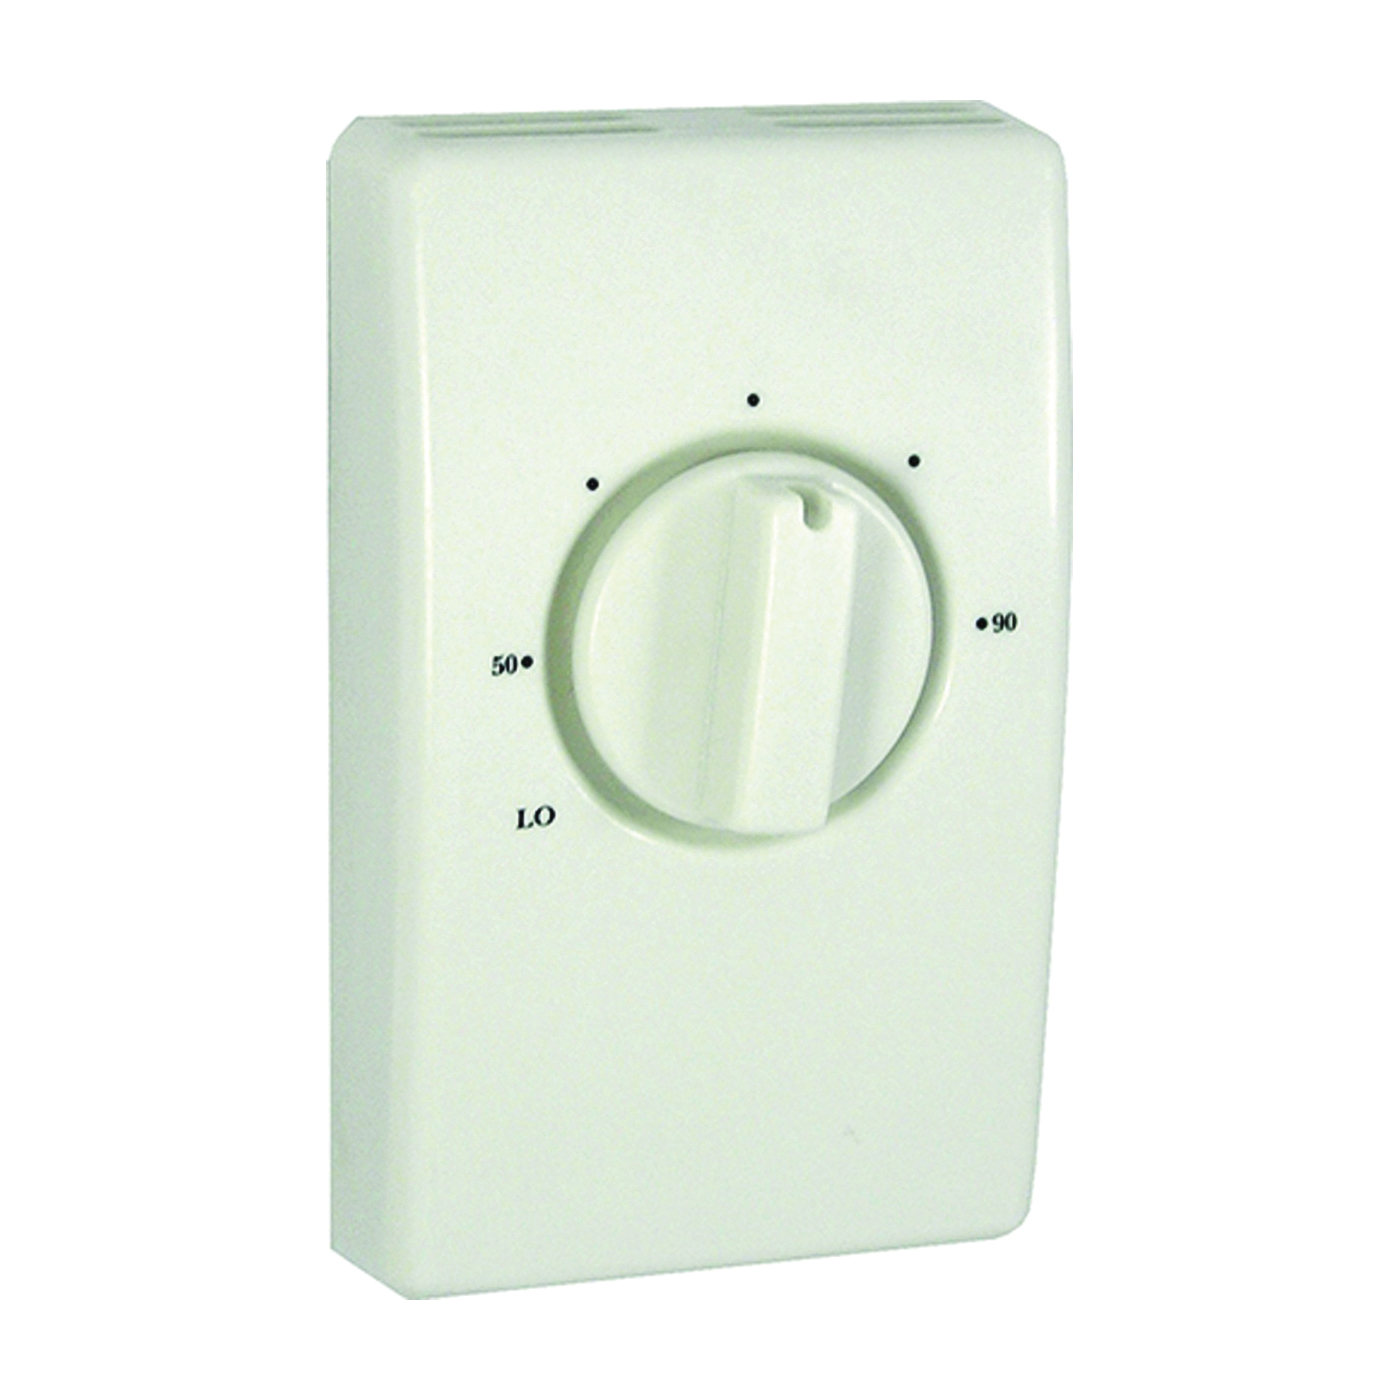 D2022 Thermostat, White